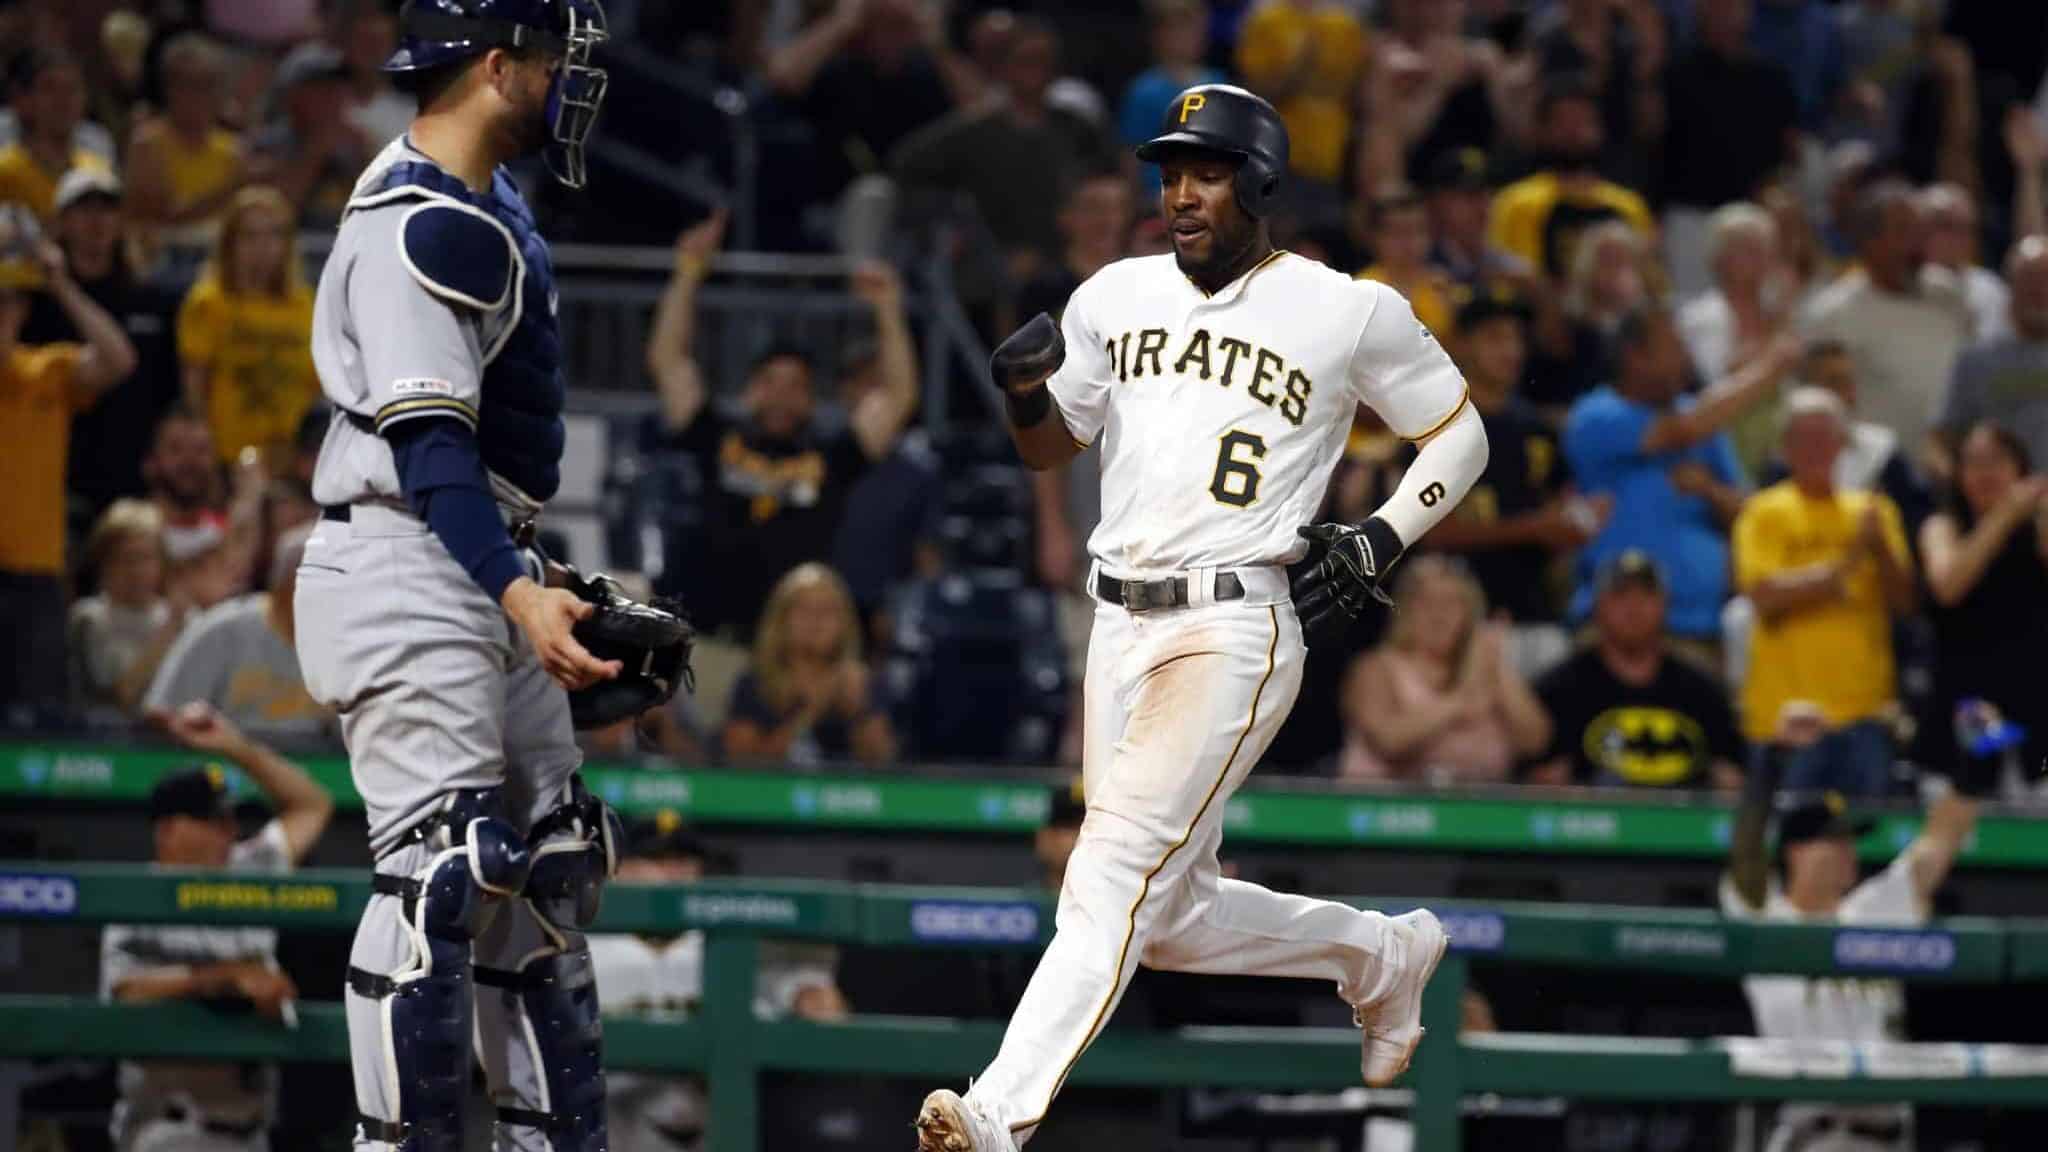 PITTSBURGH, PA - AUGUST 06: Starling Marte #6 of the Pittsburgh Pirates scores on an RBI double in the sixth inning against the Milwaukee Brewers at PNC Park on August 6, 2019 in Pittsburgh, Pennsylvania.